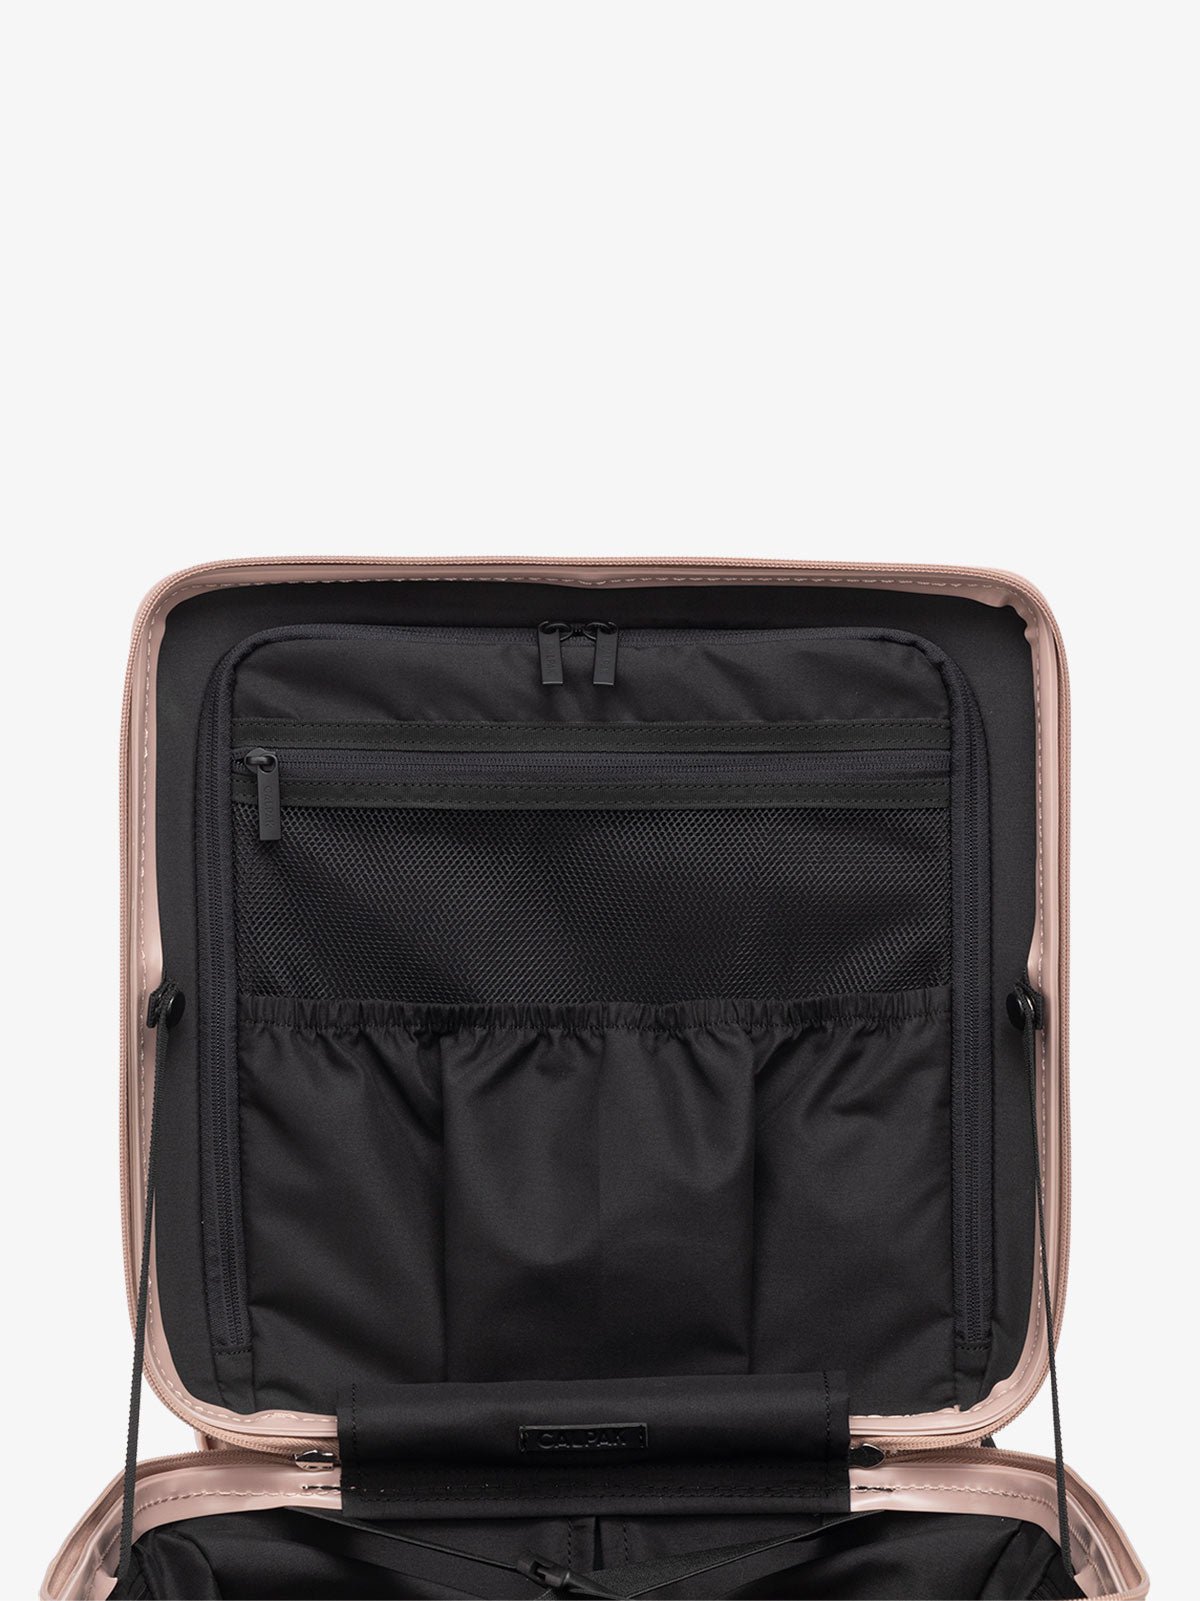 CALPAK Ambuer small wheeled carry on with multiple interior pockets and compression straps in rose gold